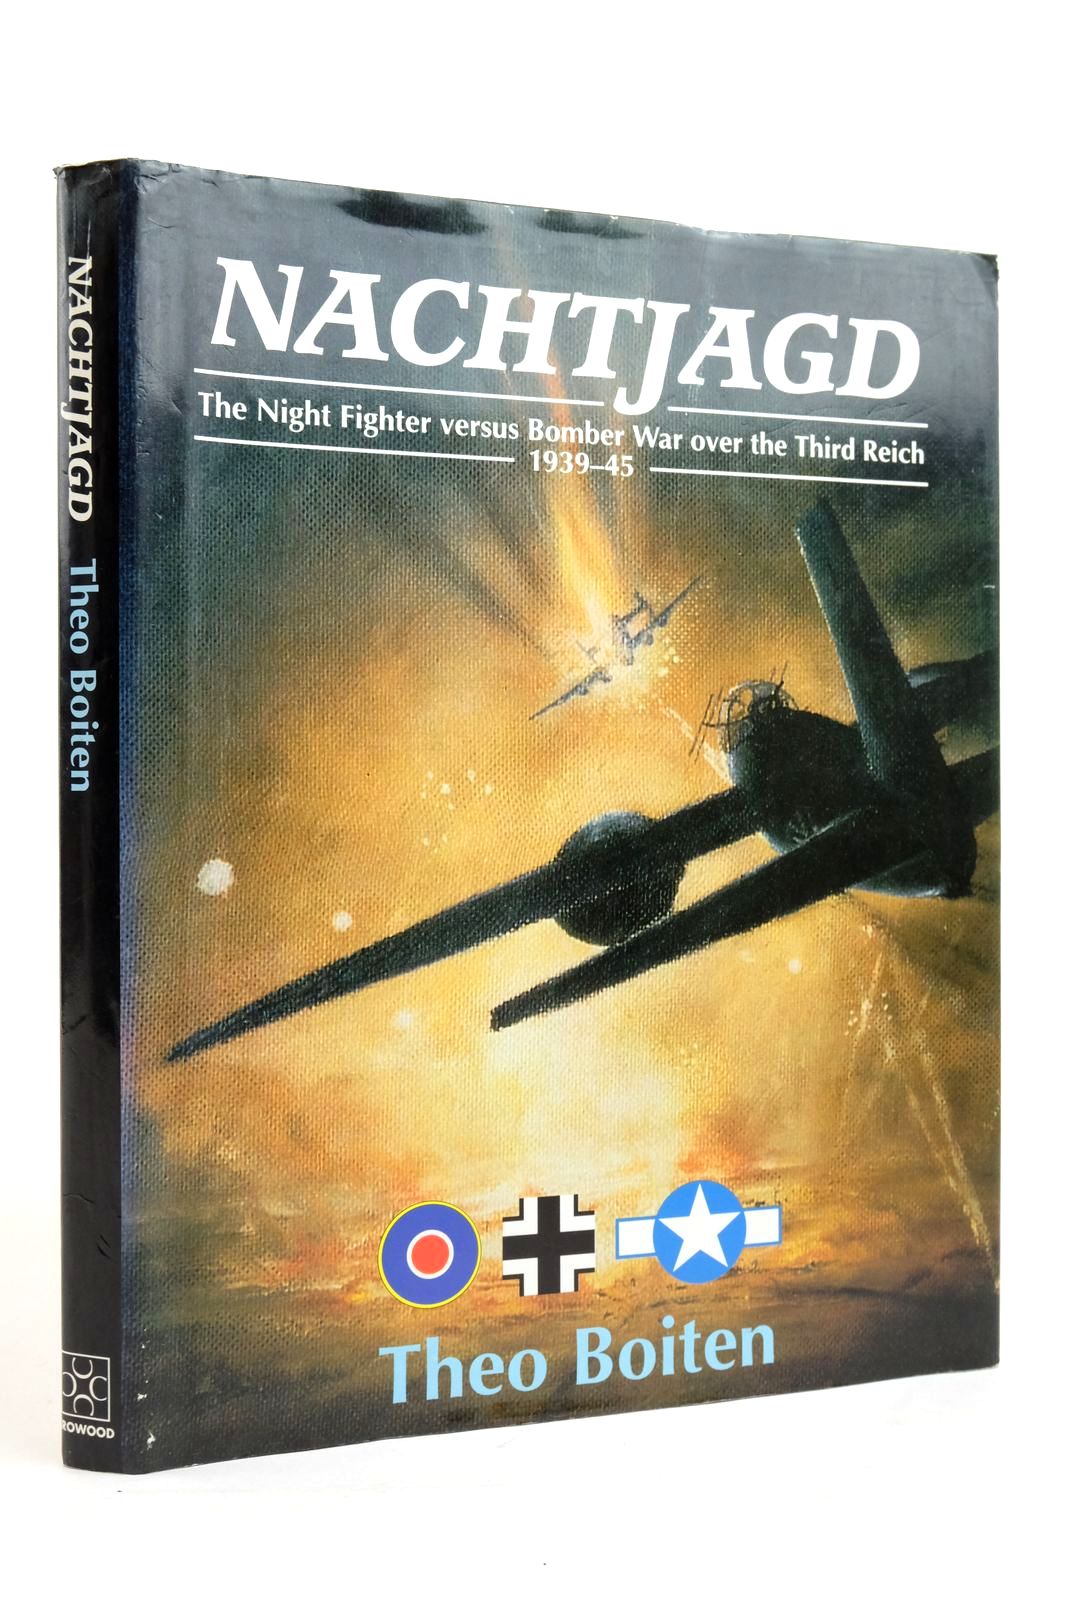 Photo of NACHTJAGD: THE NIGHT FIGHTER VERSUS BOMBER WAR OVER THE THIRD REICH 1939-45- Stock Number: 2136236